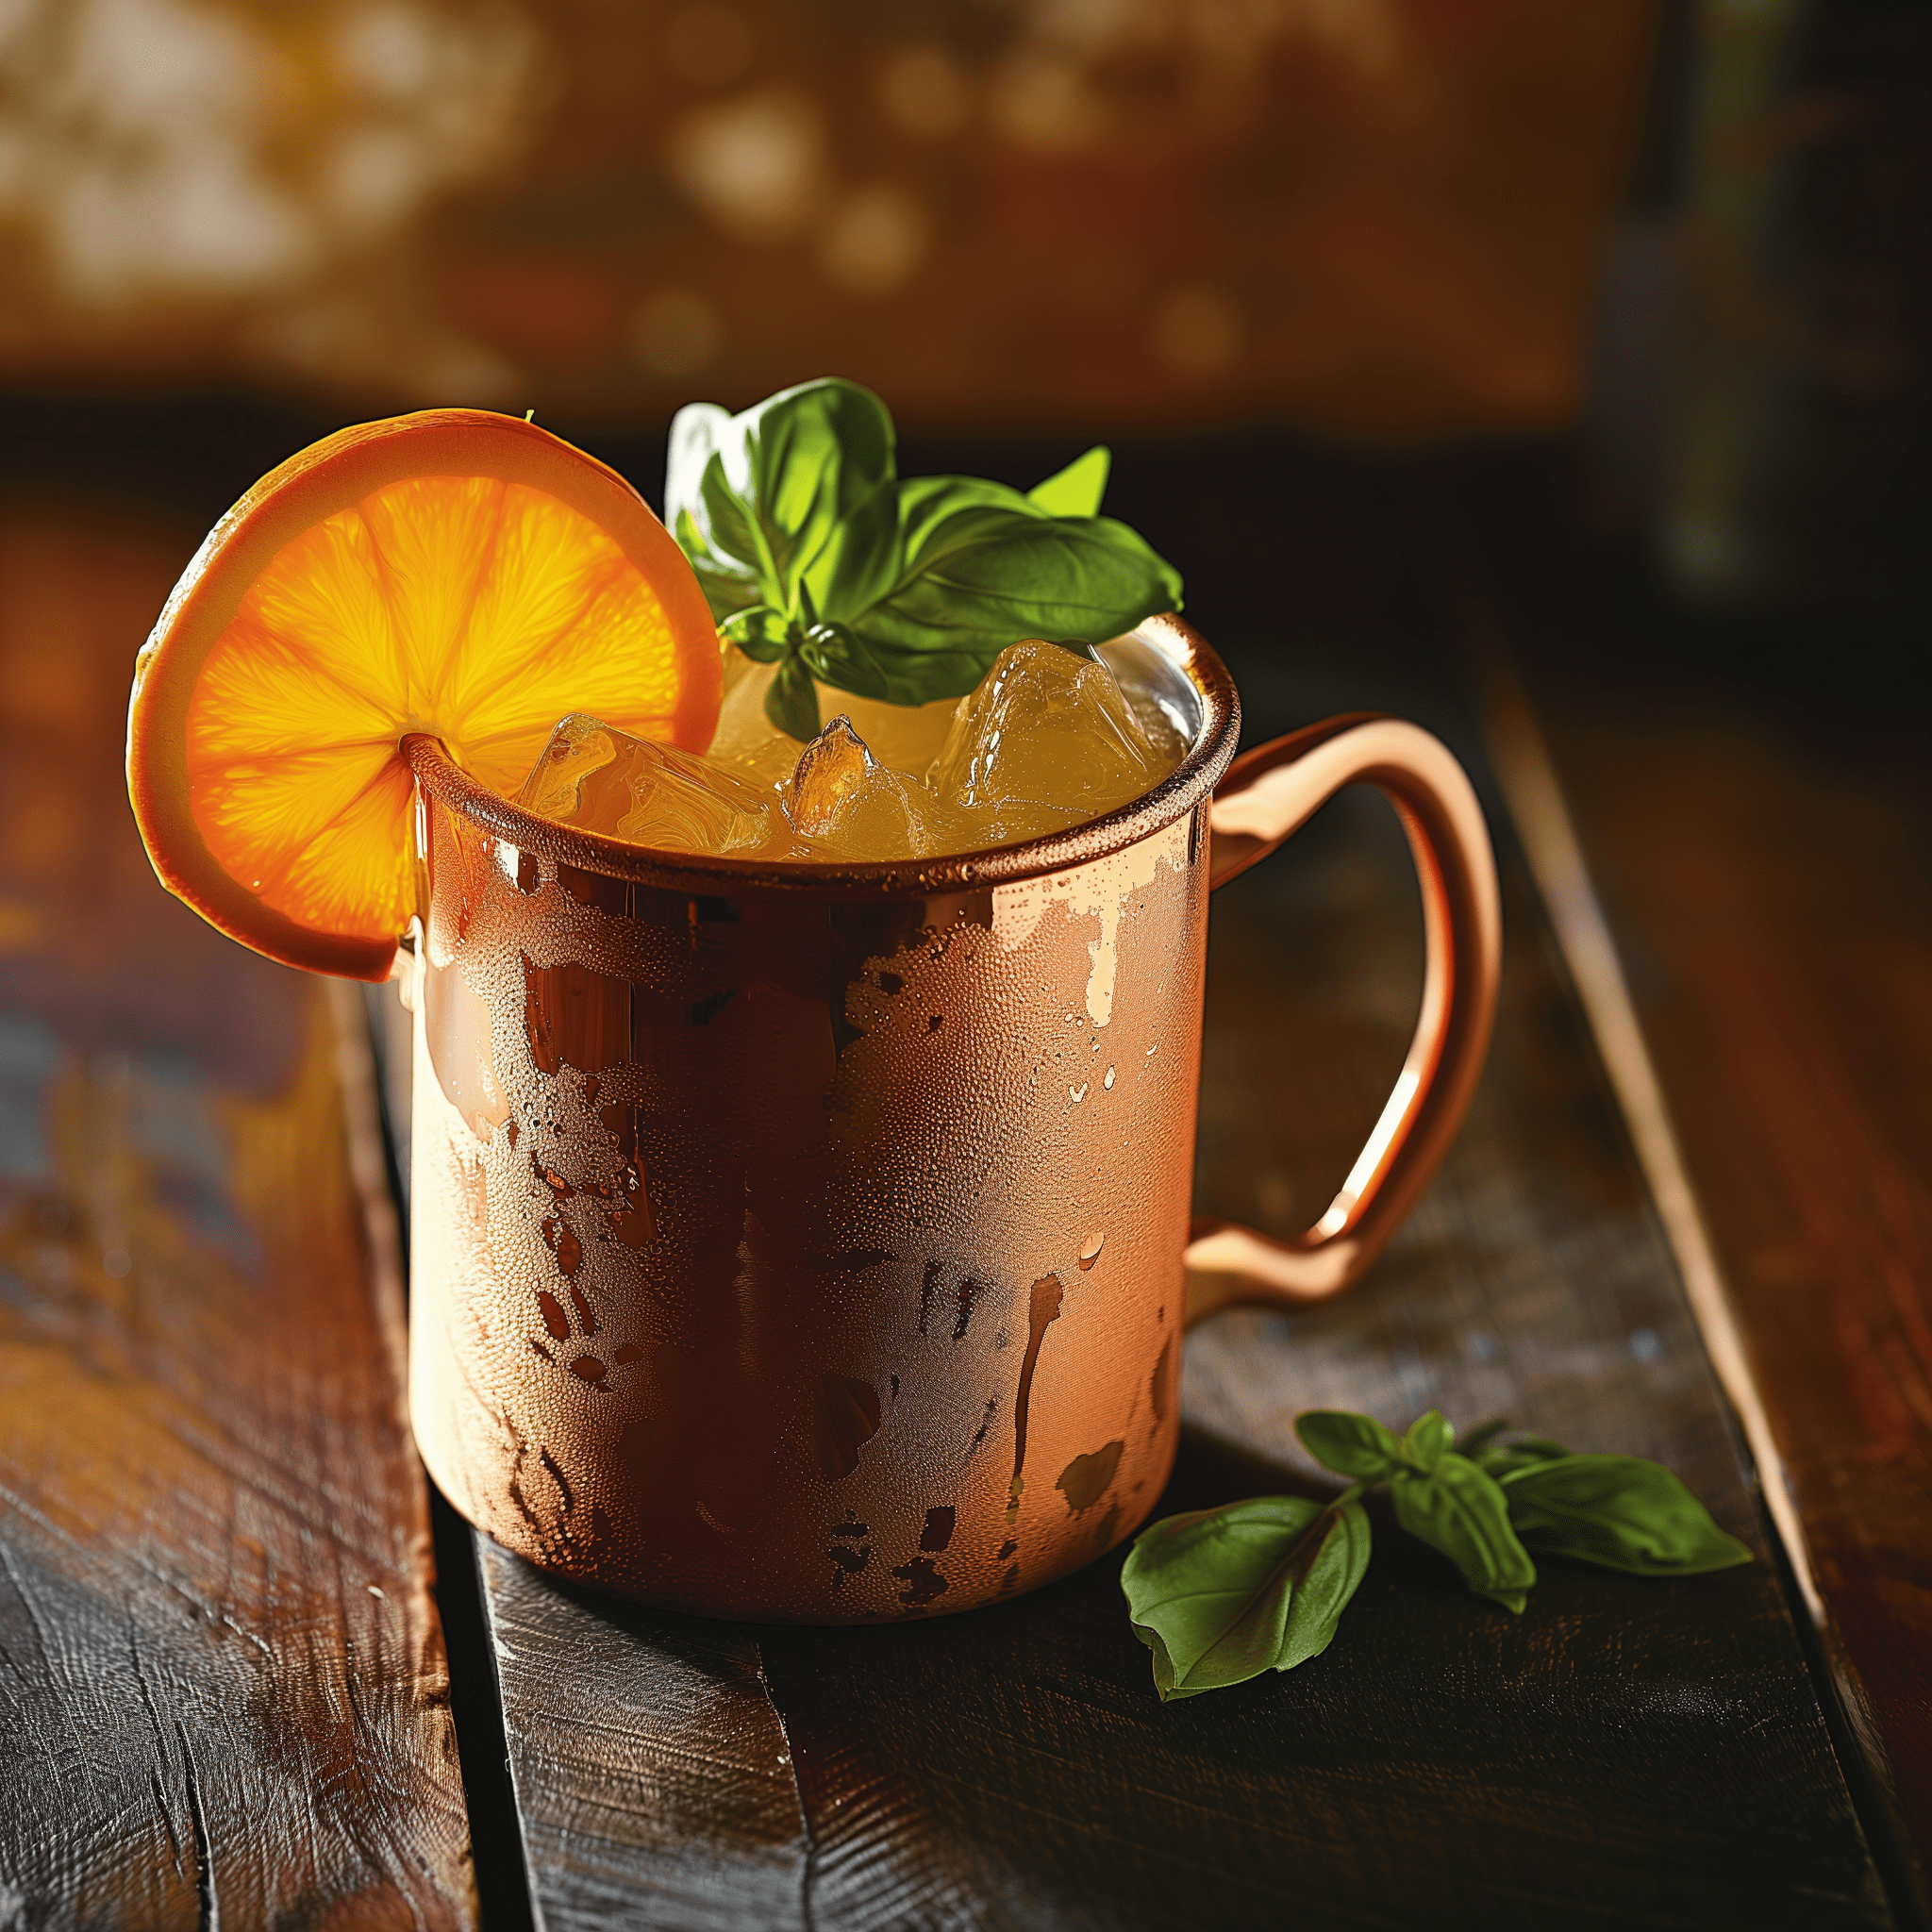 Orange Moscow Mule Cocktail Recipe - The Orange Moscow Mule offers a zesty and refreshing taste with a balance of sweet and tart from the orange and lime juices. The ginger beer provides a spicy kick that complements the citrus flavors, while the vodka adds a smooth and subtle alcoholic warmth.